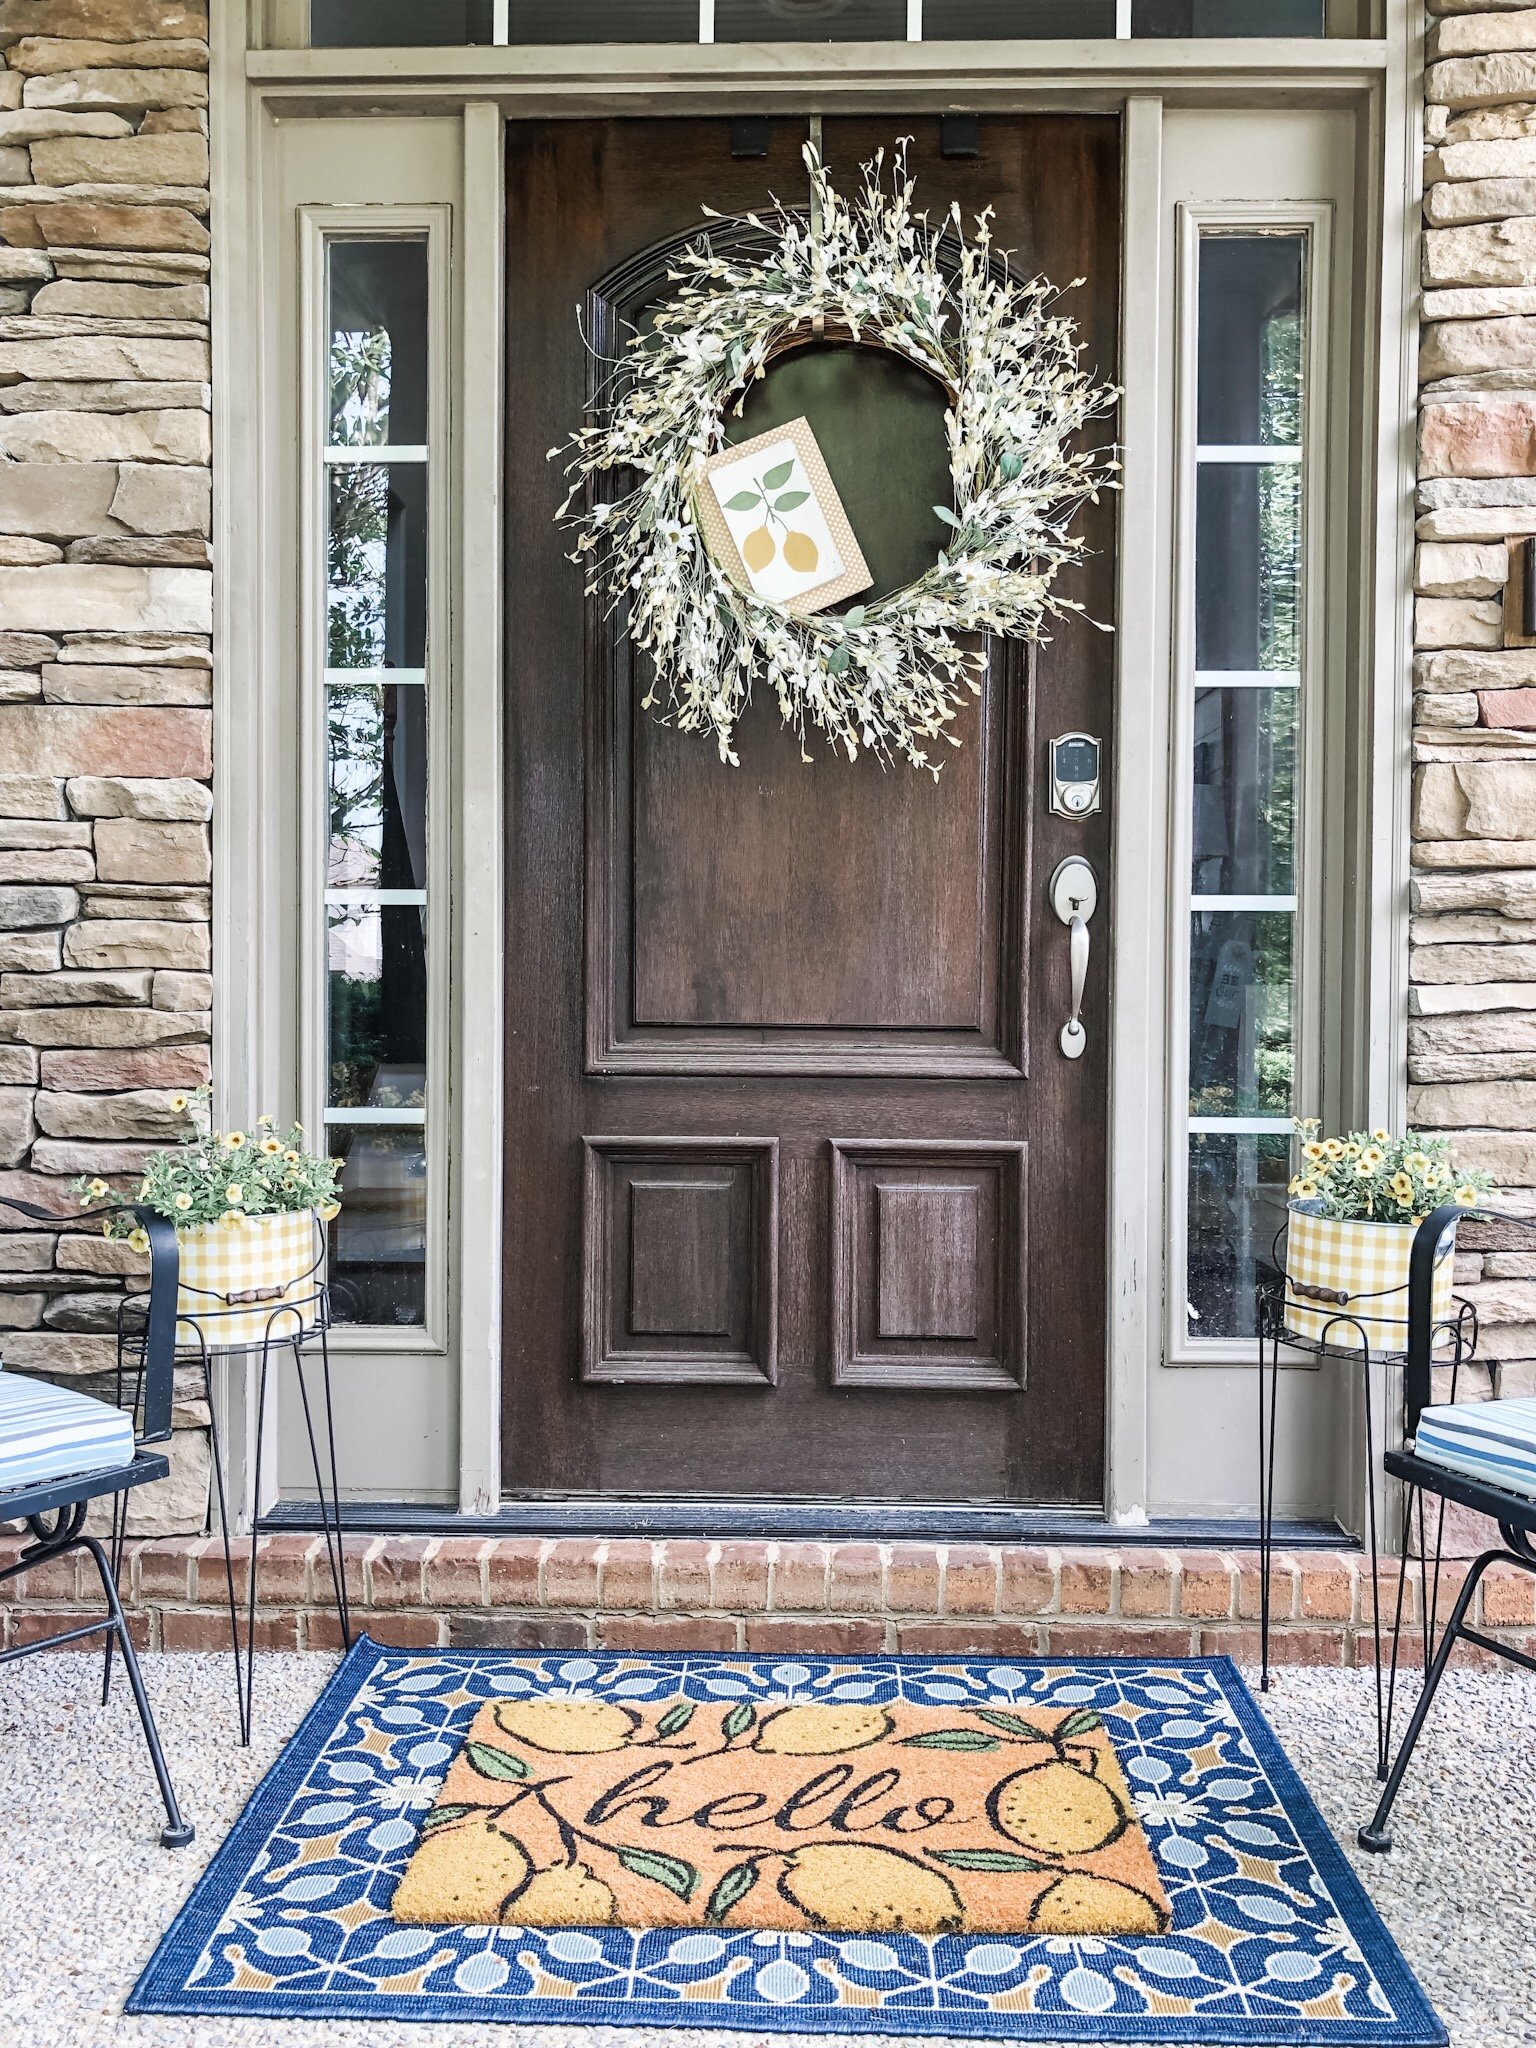 Small front porch ideas - filnconnect